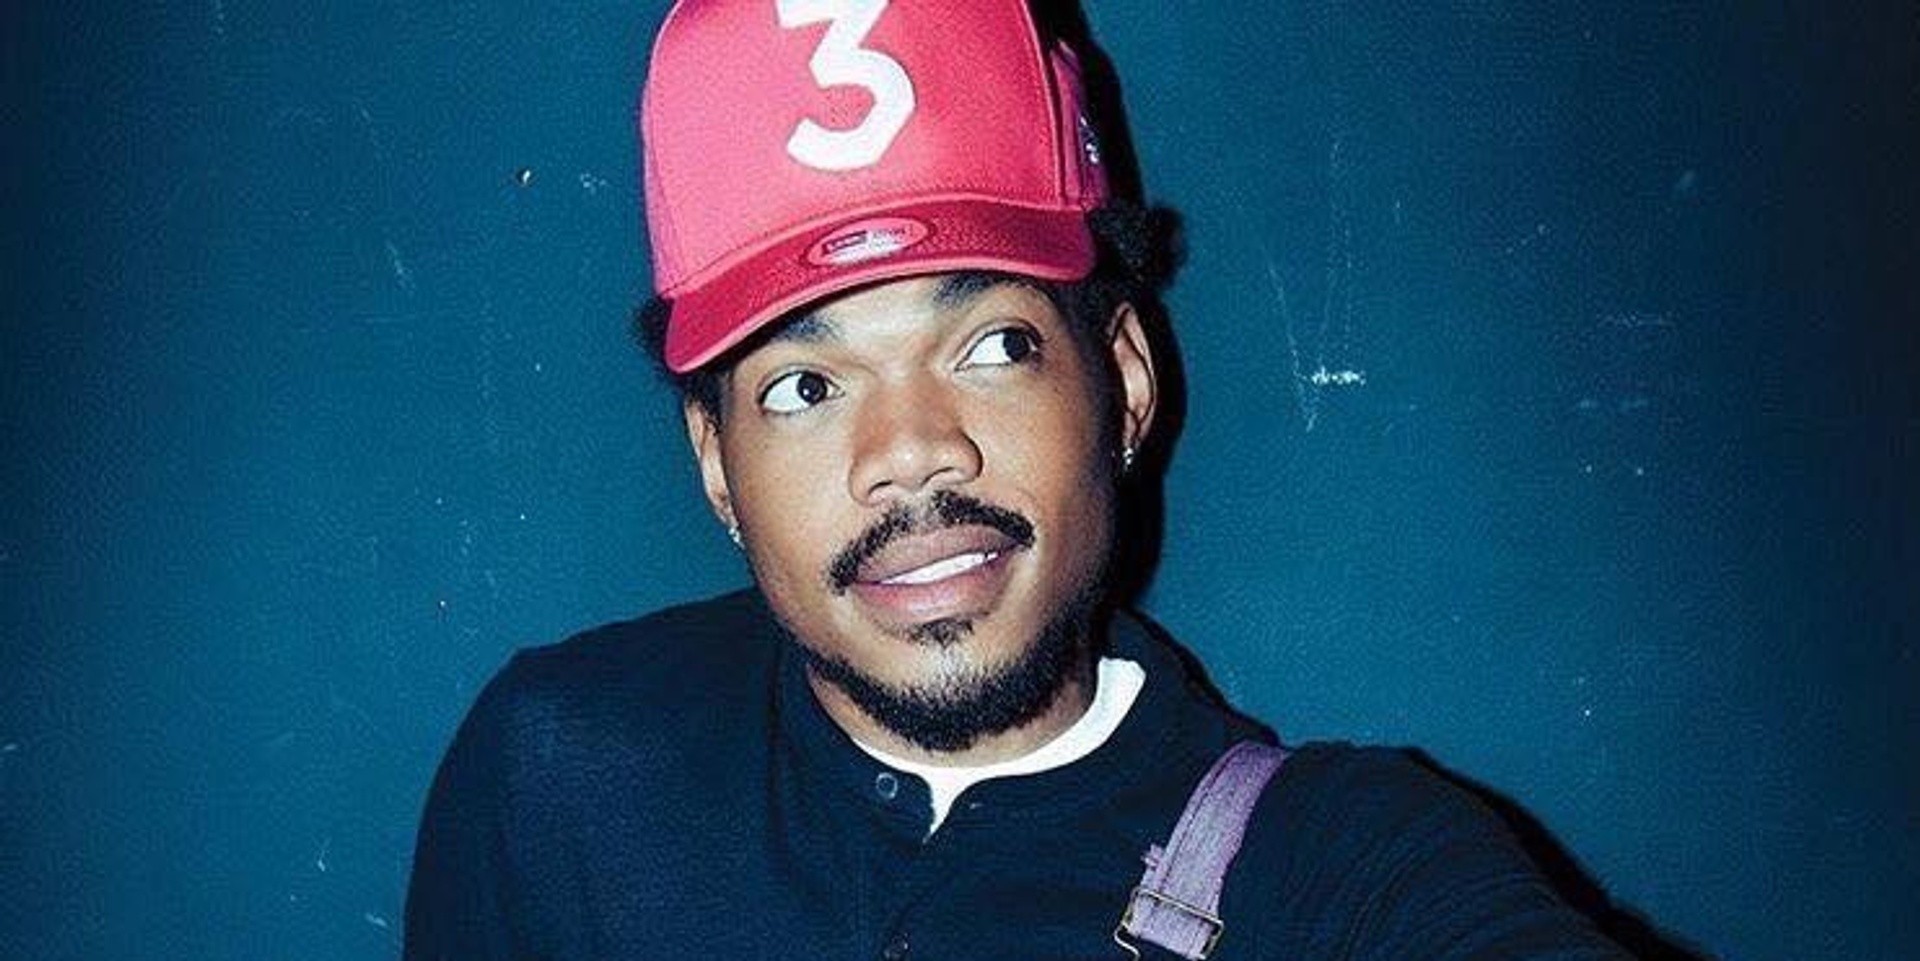 Chance The Rapper is coming to Manila